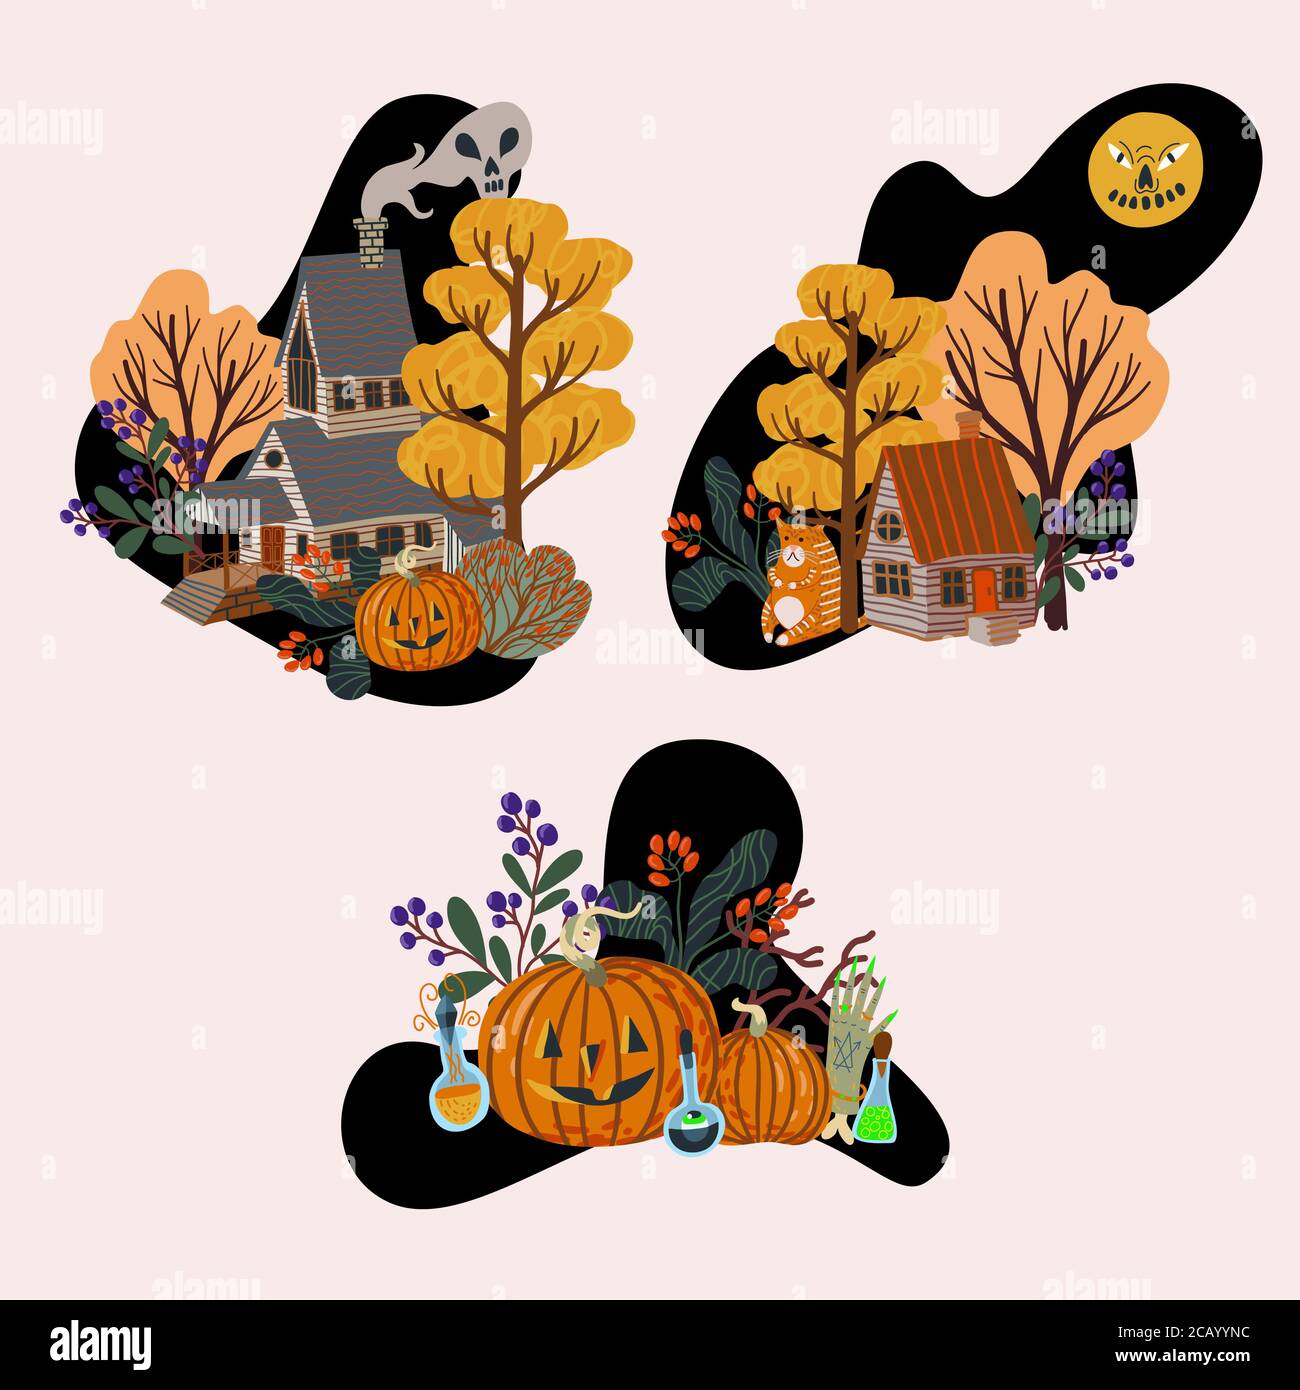 Old wooden houses and halloween elements isolated. Vector cartoon flat illustration. Stock Vector